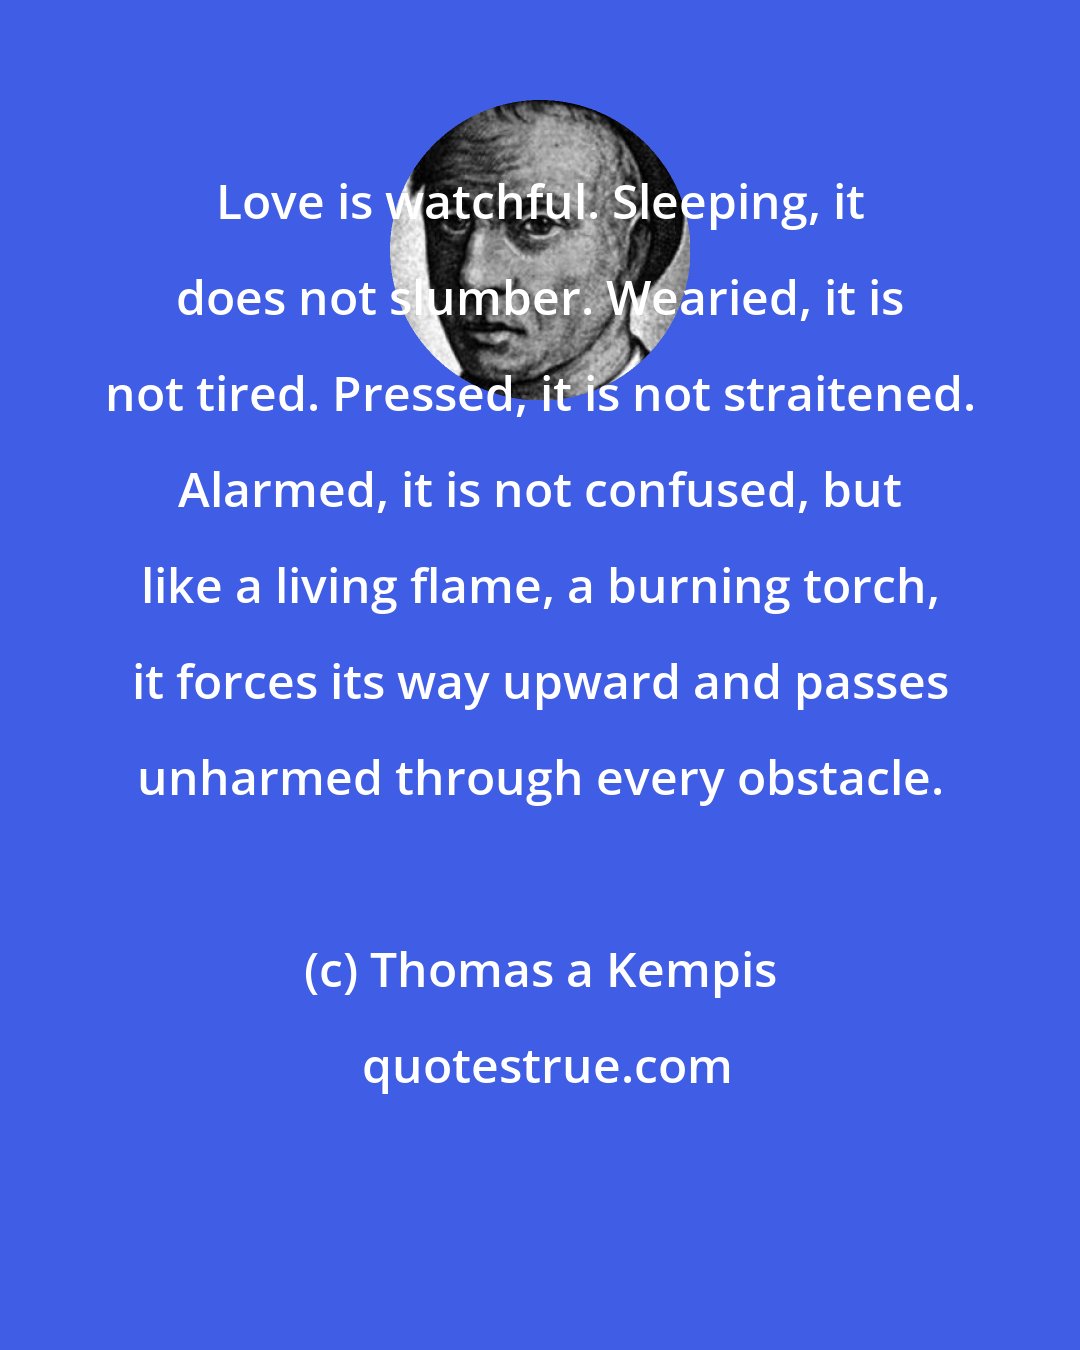 Thomas a Kempis: Love is watchful. Sleeping, it does not slumber. Wearied, it is not tired. Pressed, it is not straitened. Alarmed, it is not confused, but like a living flame, a burning torch, it forces its way upward and passes unharmed through every obstacle.